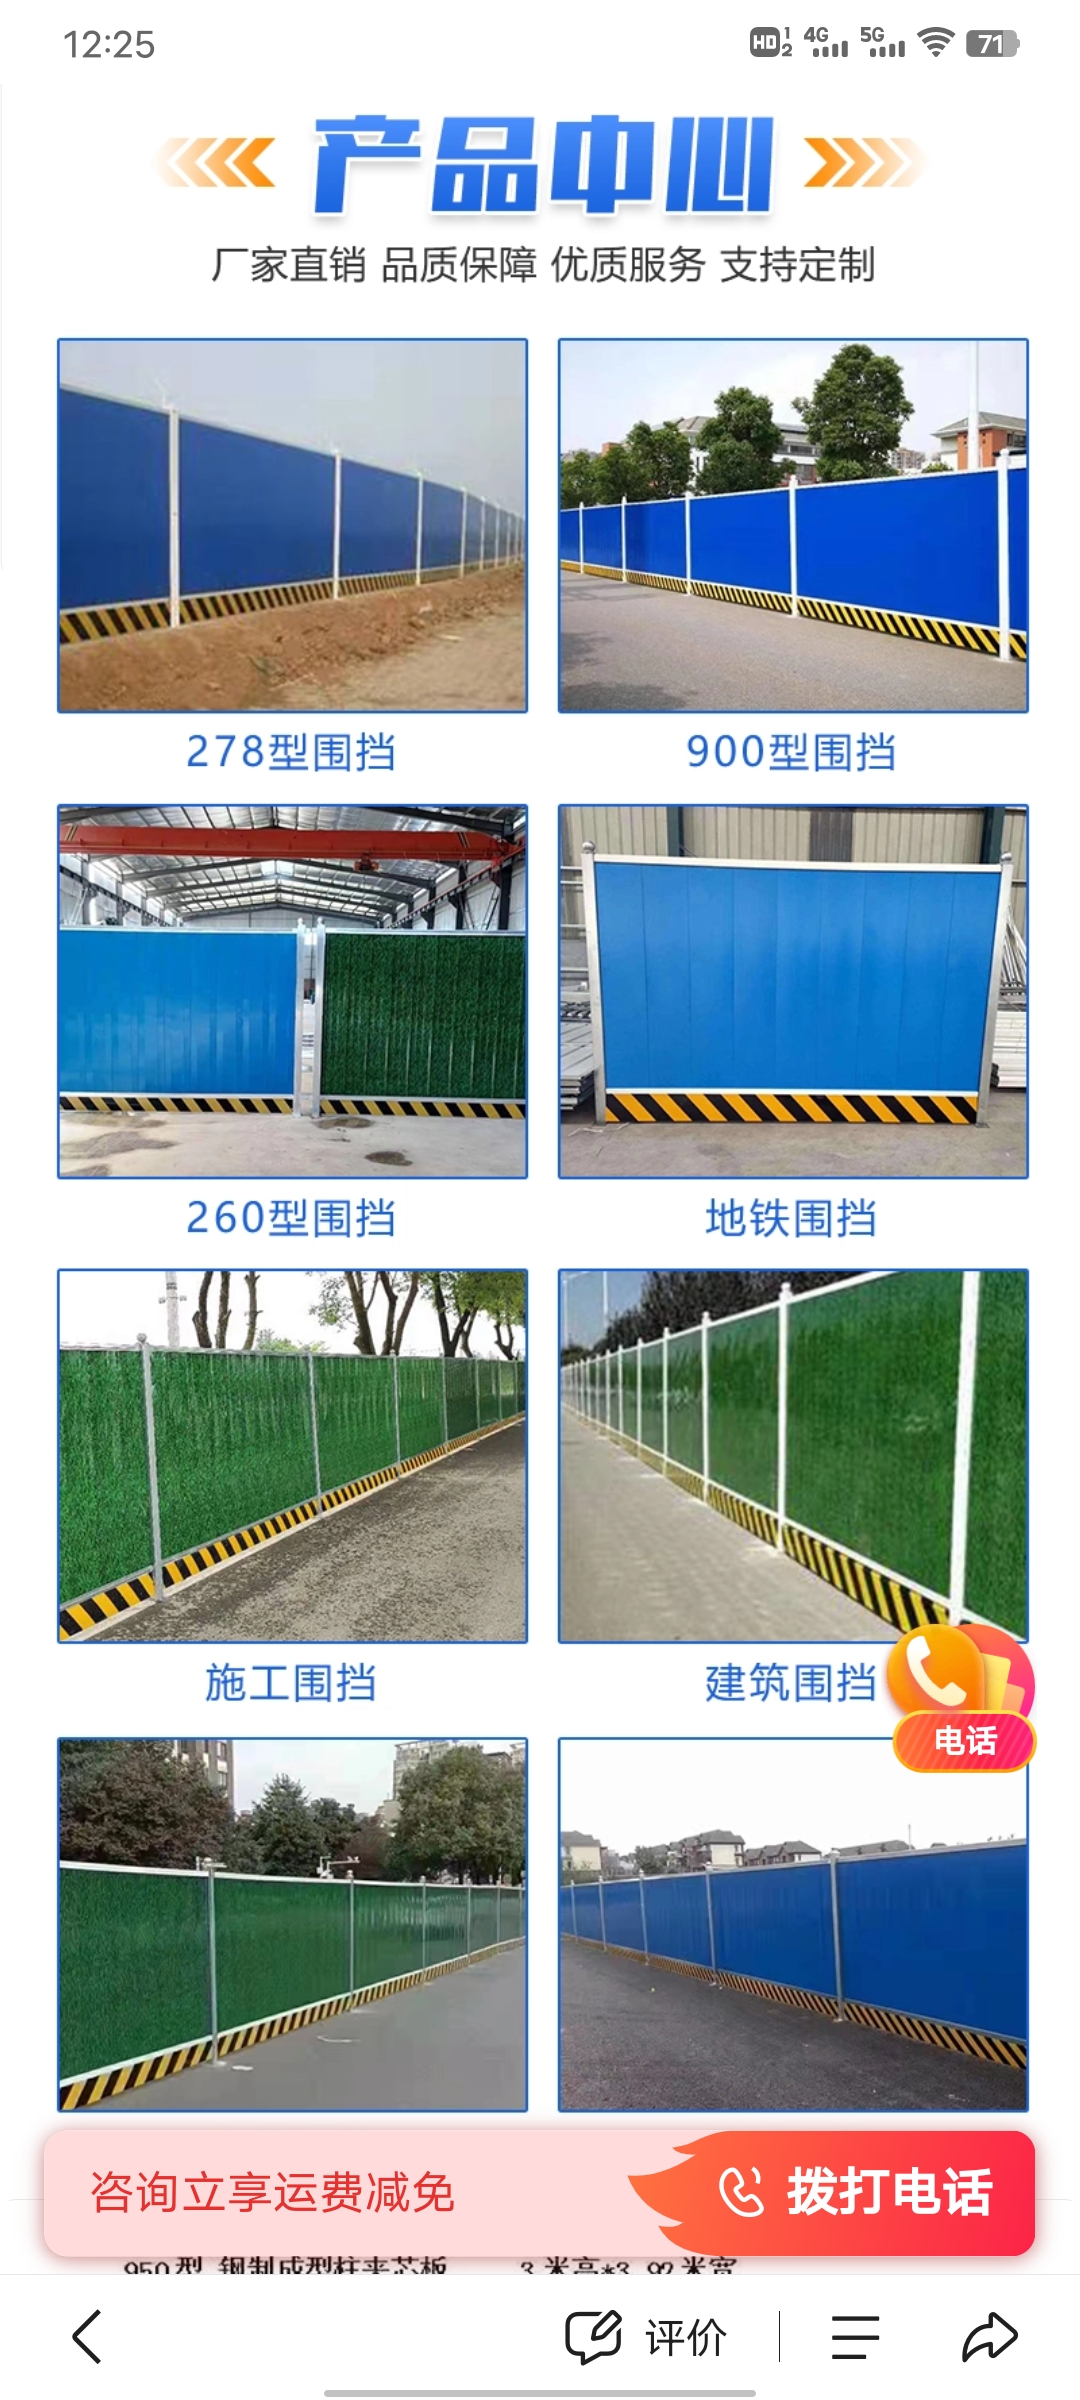 New type of steel structure fence for municipal road maintenance and beautification using prefabricated enclosure